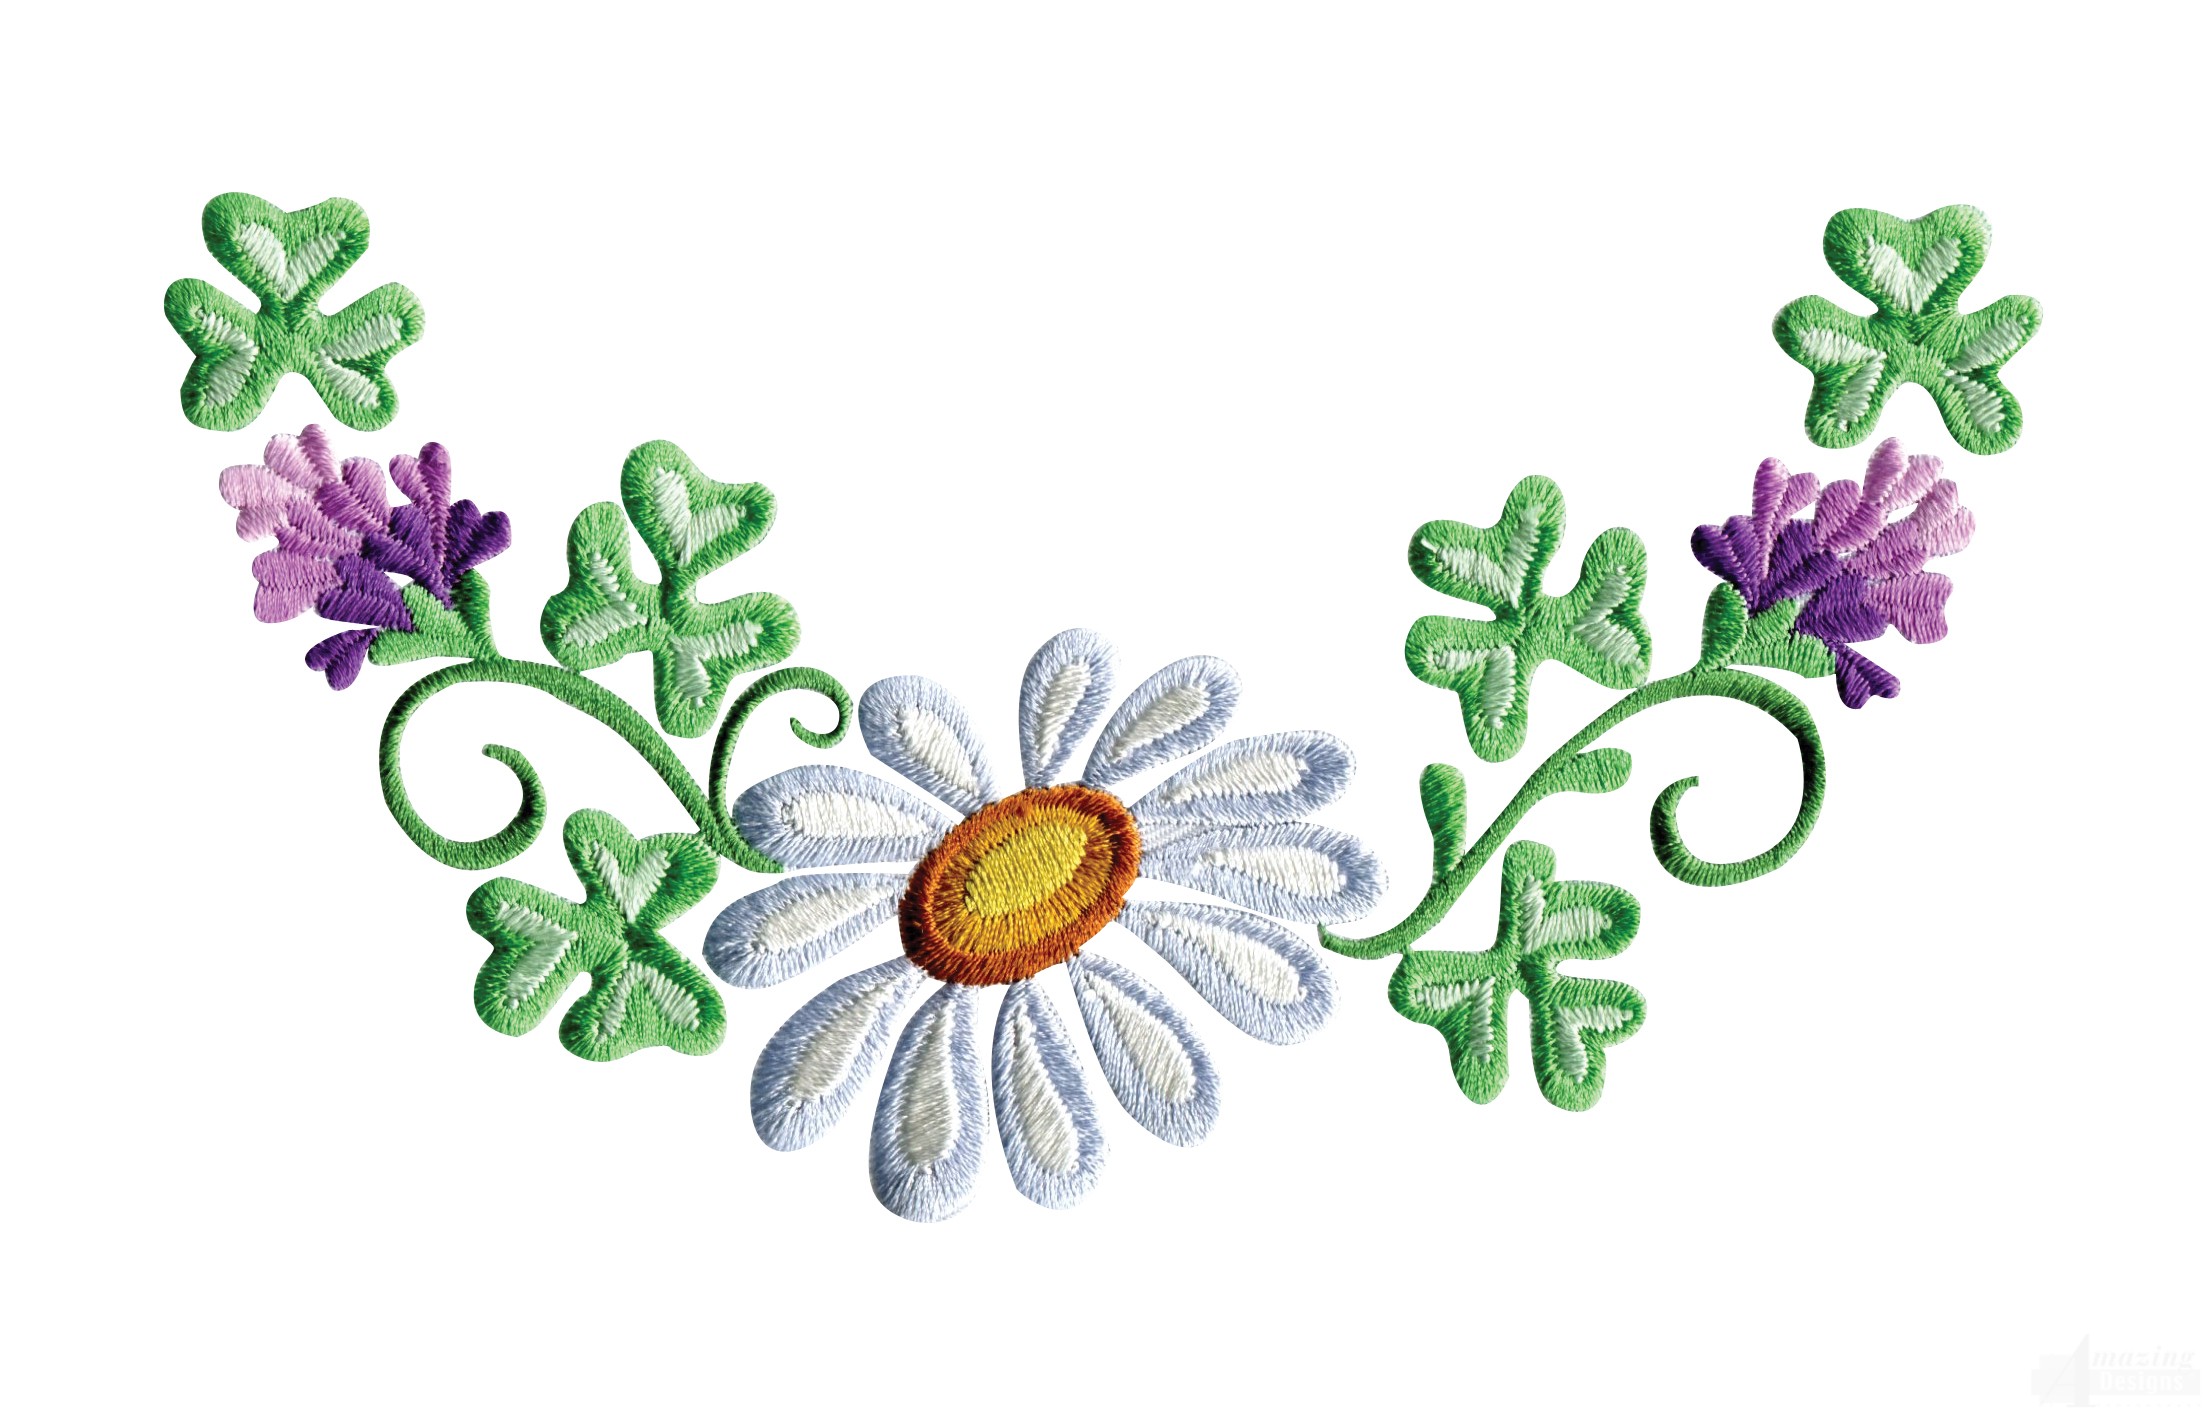 Daisy Floral Border 1 Embroidery Design   Clipart Best   Clipart Best